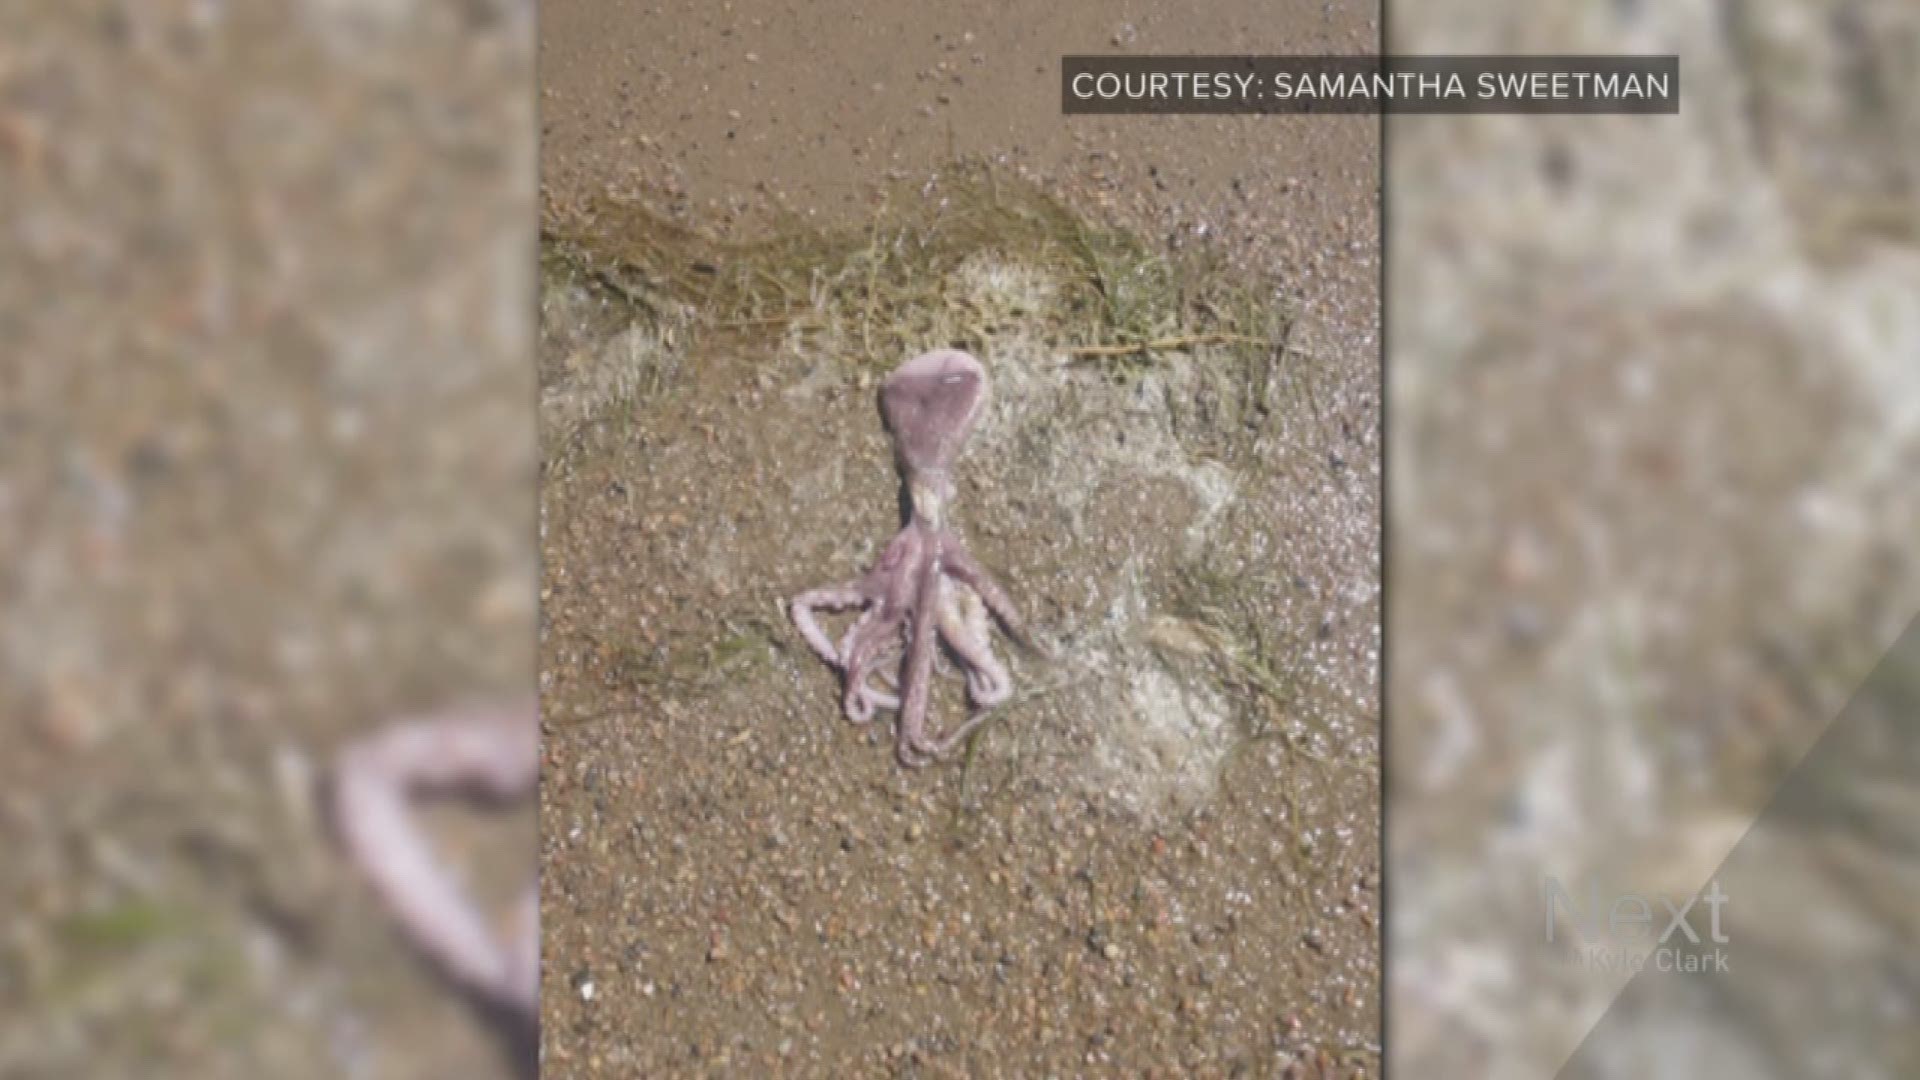 Someone's either throwing their octopuses in Boyd Lake while they're alive or dead. Either way, that's not cool. 